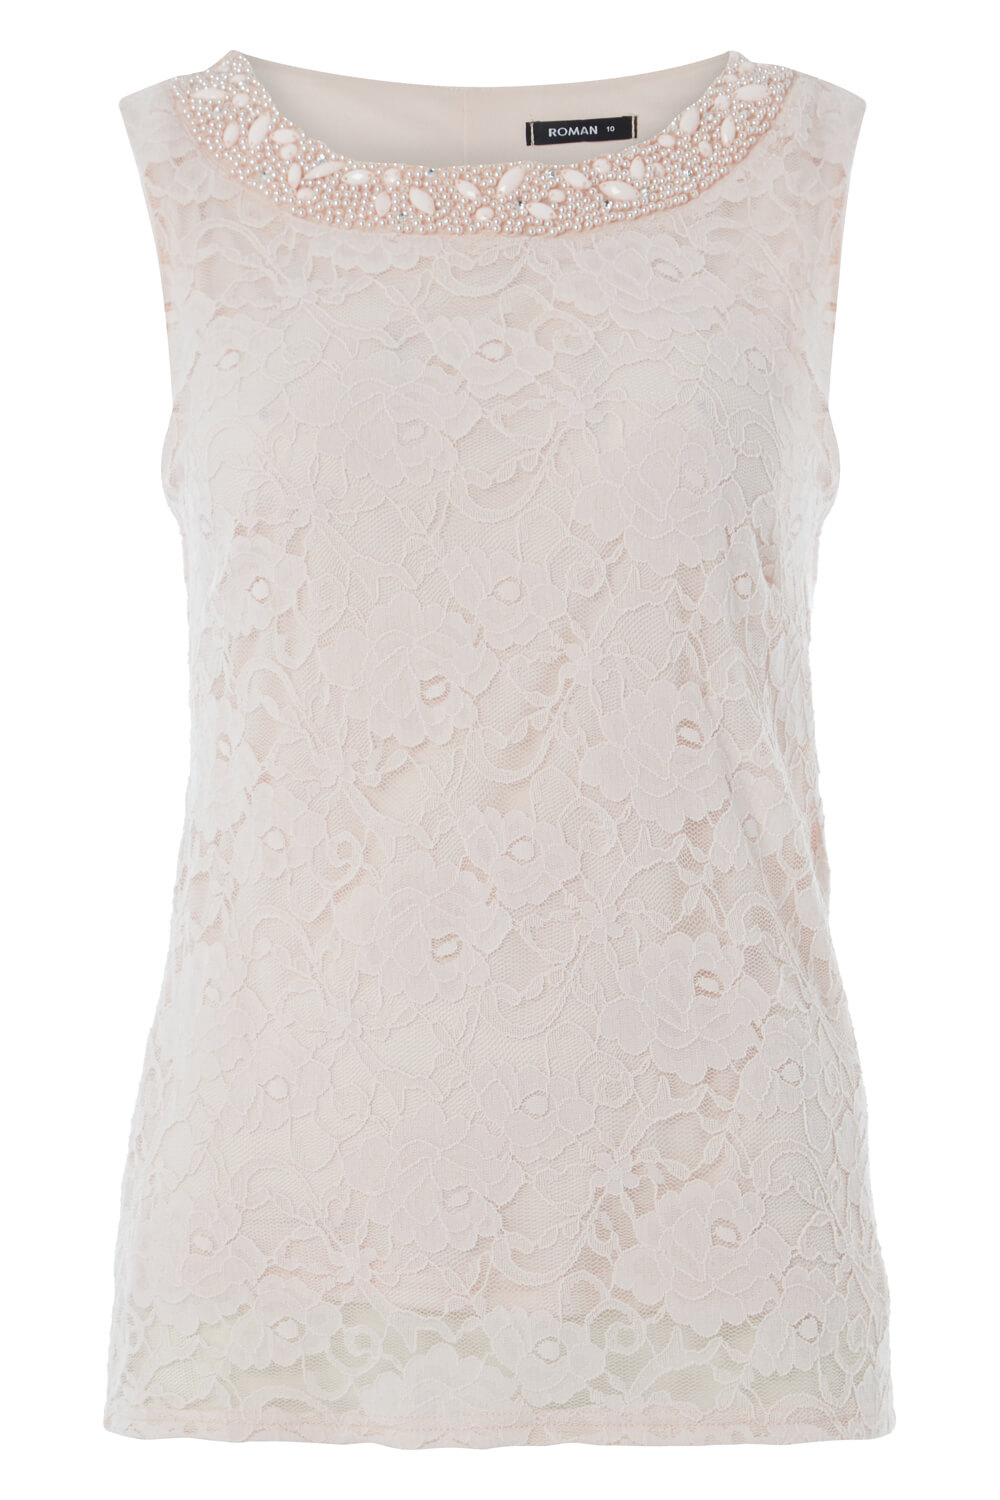 PINK Embellished Lace Shell Top, Image 5 of 9